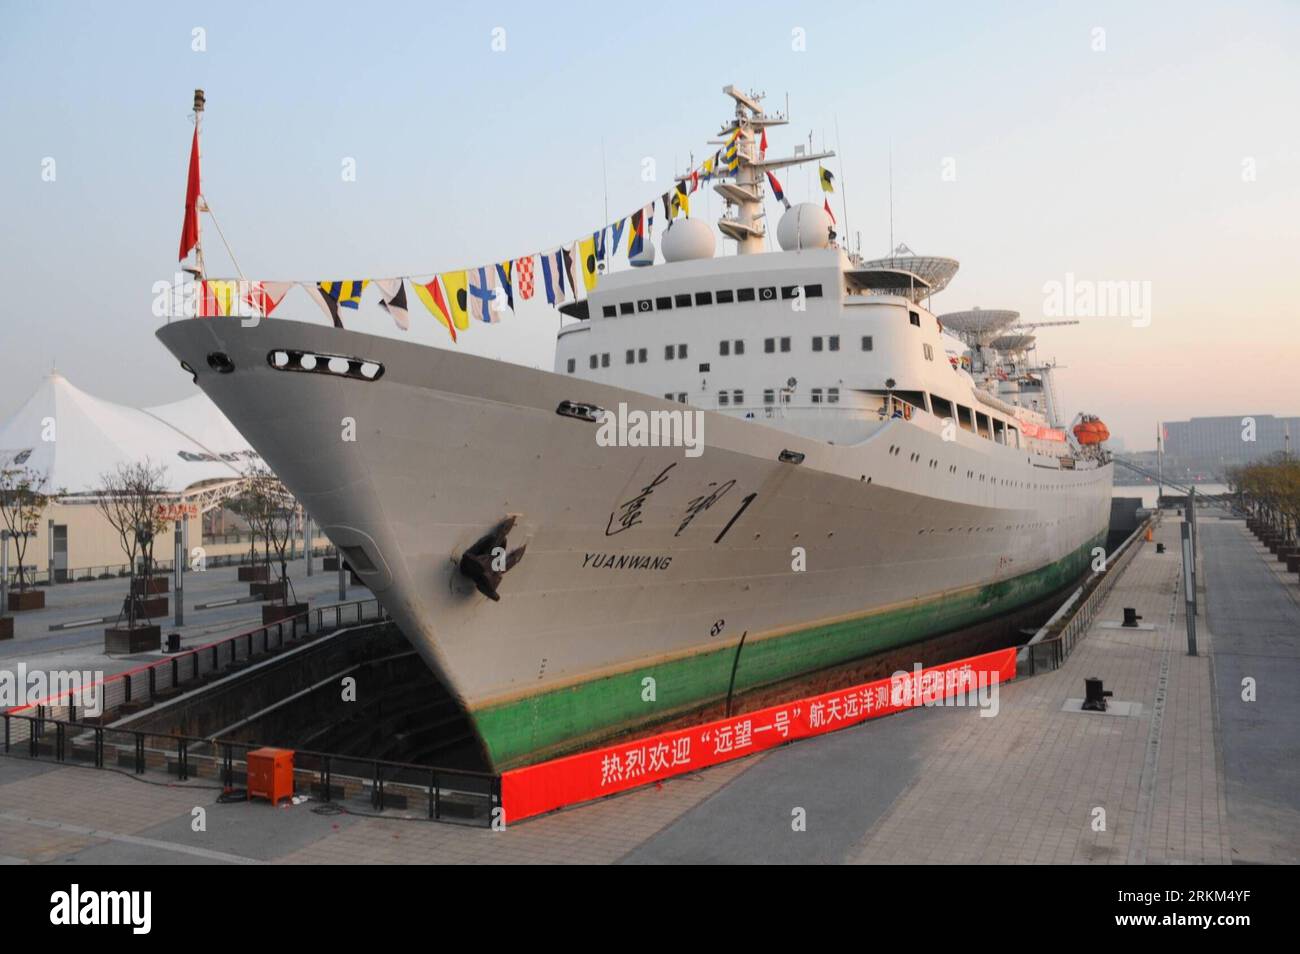 Bildnummer: 56516616  Datum: 27.11.2011  Copyright: imago/Xinhua (111127) -- SHANGHAI, Nov. 27, 2011 (Xinhua) -- The Yuanwang I Space Tracking Ship moors at the World Expo Park in Shanghai, east China, Nov. 27, 2011. Yuanwang I , China s first vessel for tracking and controlling rockets and spacecrafts that was retired in 2010 after 32 years on service, was moved to Shanghai s World Expo Park on Saturday. The vessel will serve as a museum for scientific eduction. (Xinhua/Guo Changyao) (ljh) CHINA-SHANGHAI- YUANWANG I -WORLD EXPO PARK-MOVE-IN (CN) PUBLICATIONxNOTxINxCHN Gesellschaft Museum Muse Stock Photo